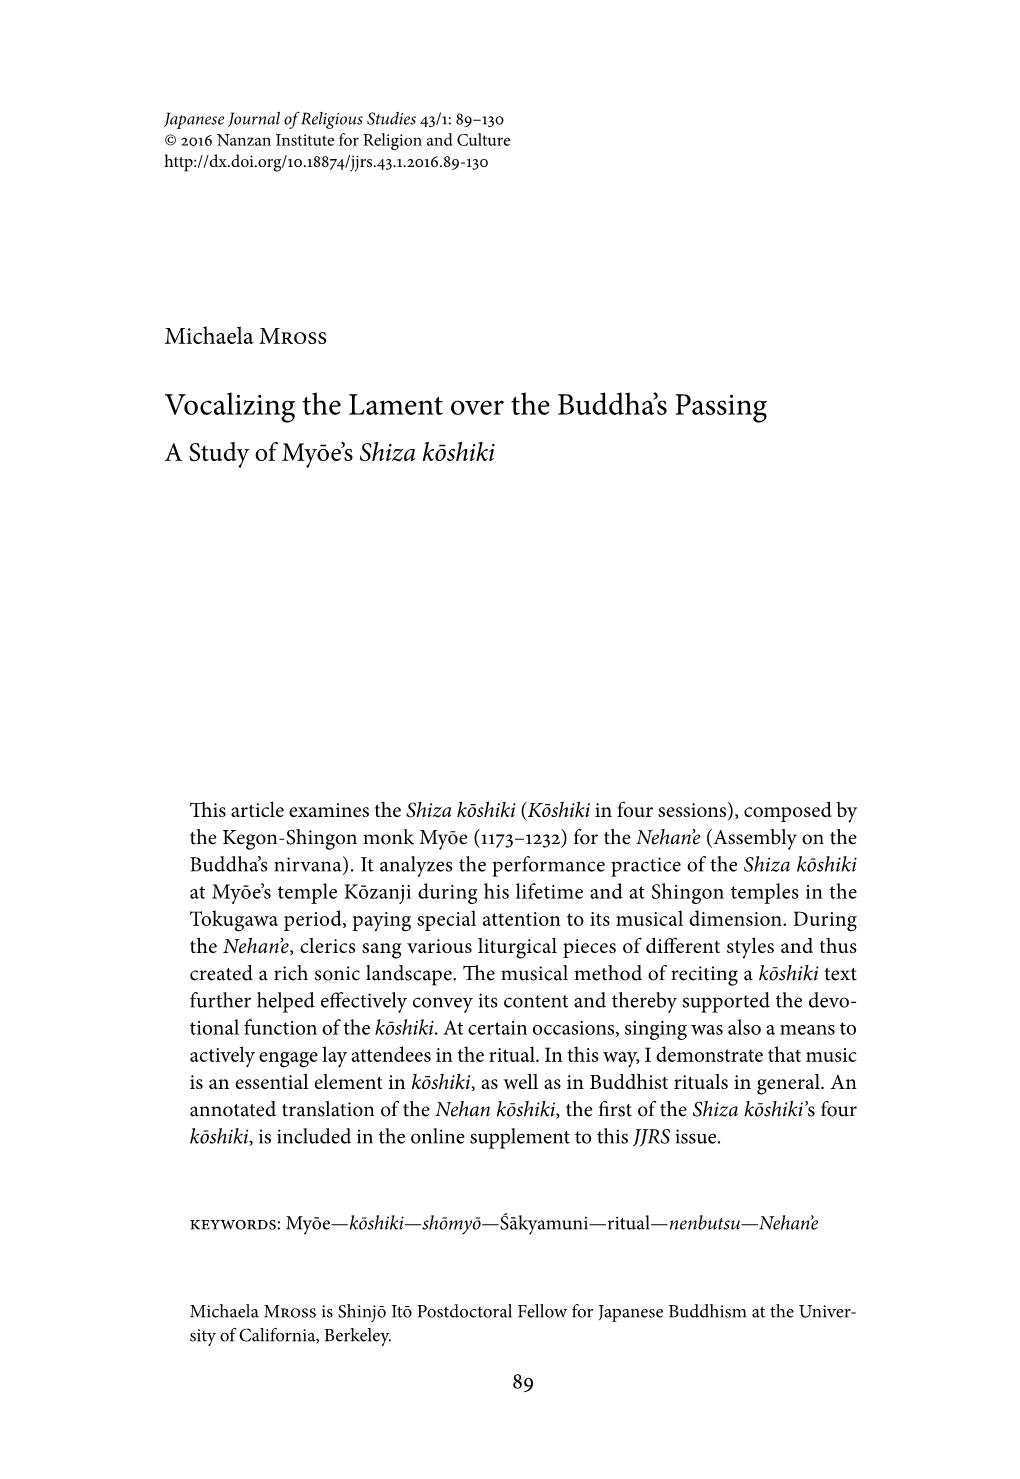 Vocalizing the Lament Over the Buddha's Passing